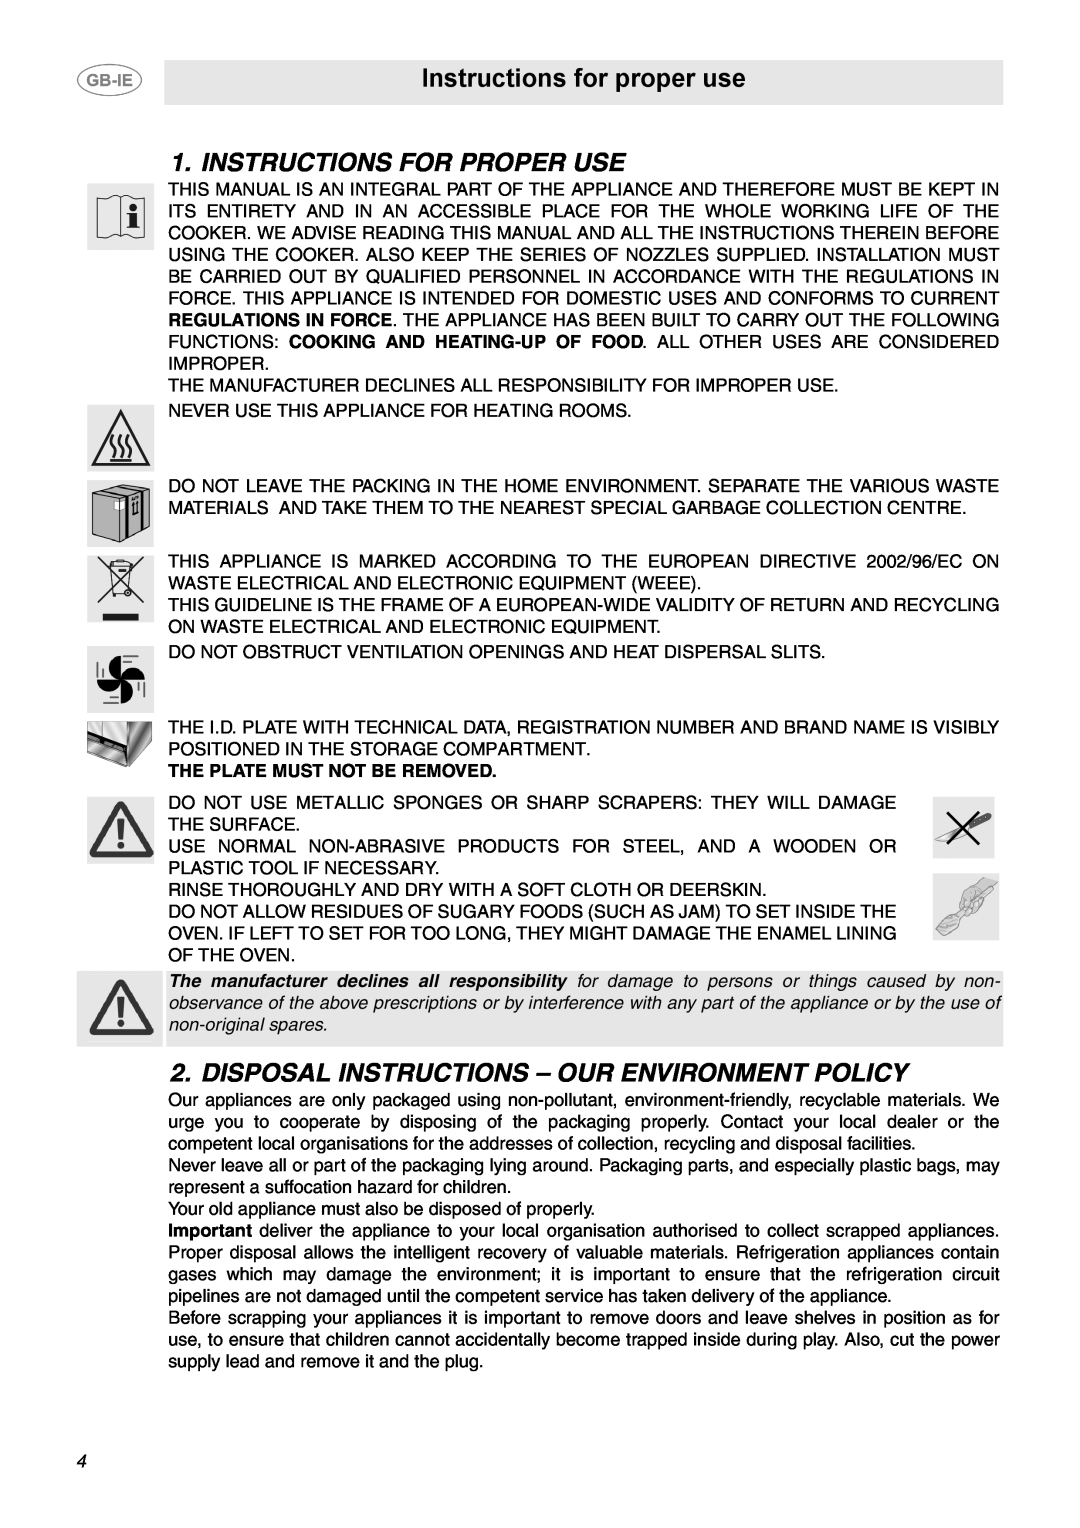 Smeg B102MFX5 Instructions for proper use, Instructions For Proper Use, Disposal Instructions - Our Environment Policy 